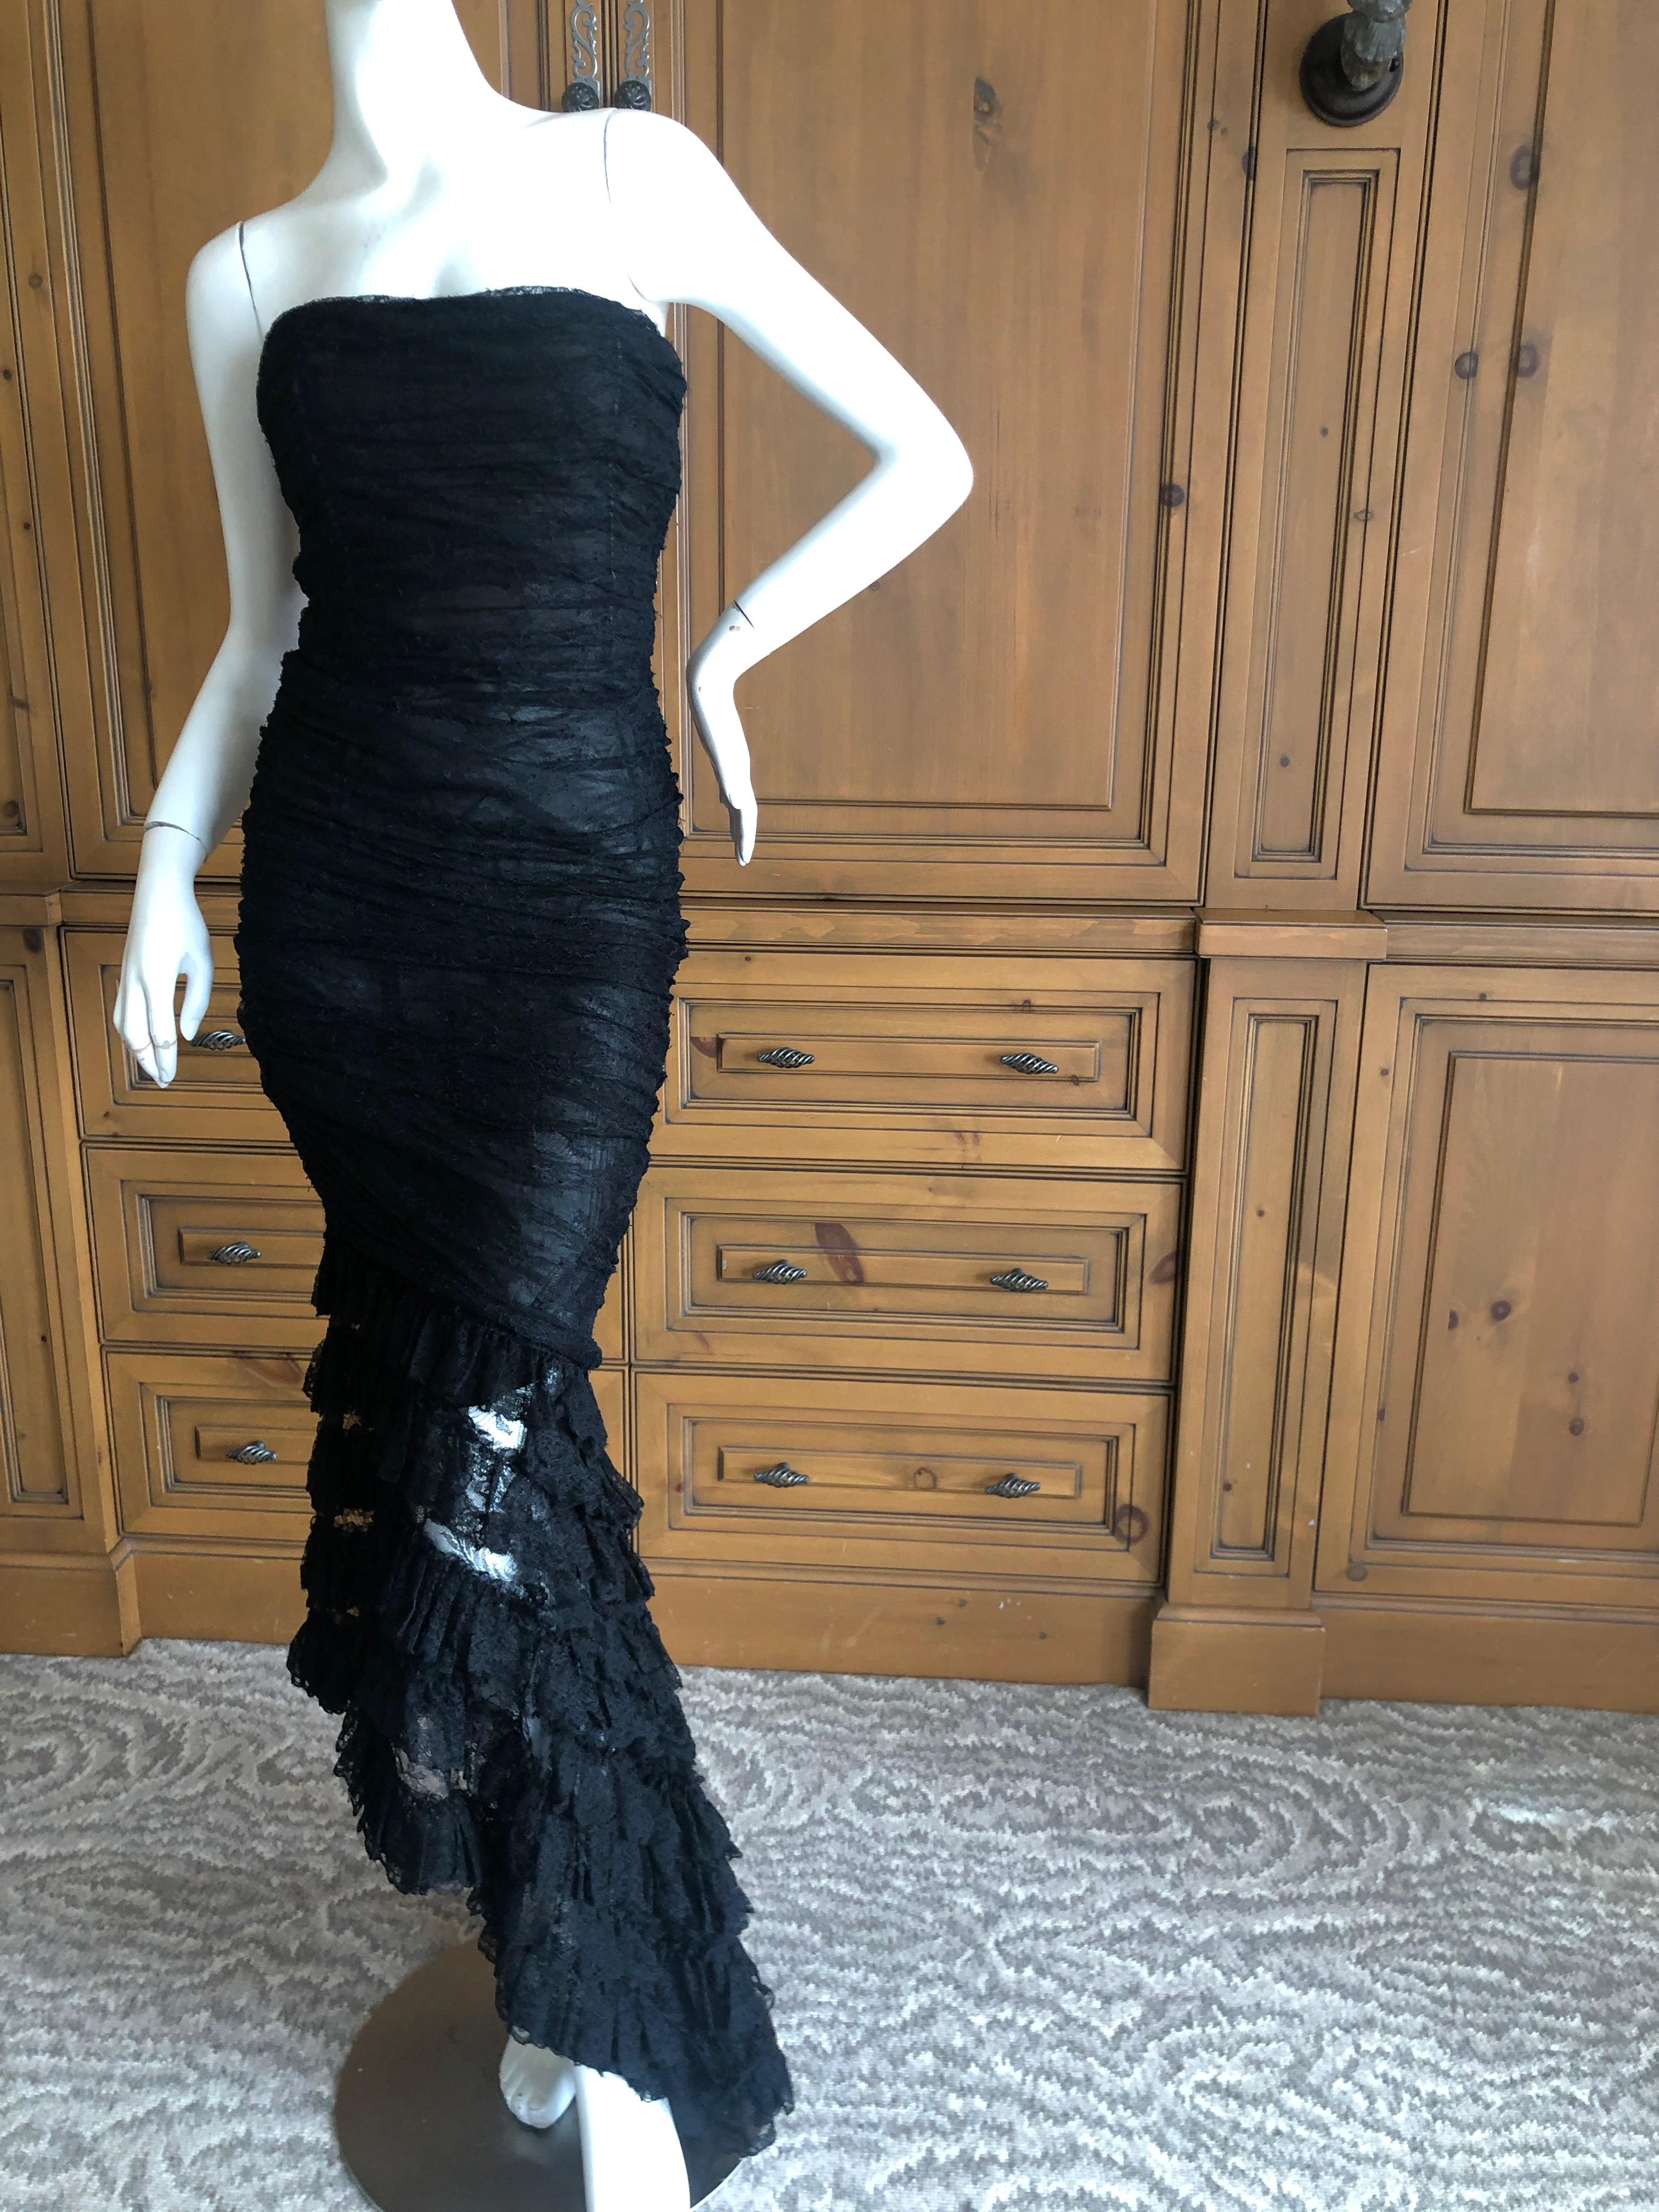  Oscar de la Renta Vintage 1980's Black Lace Flamenco Ruffled Evening Dress.
Inner corset, ruched black lace with ruffle skirting.
So  pretty, with an asymetrical hemline.
Size 0-2, no size tag.
Bust 32